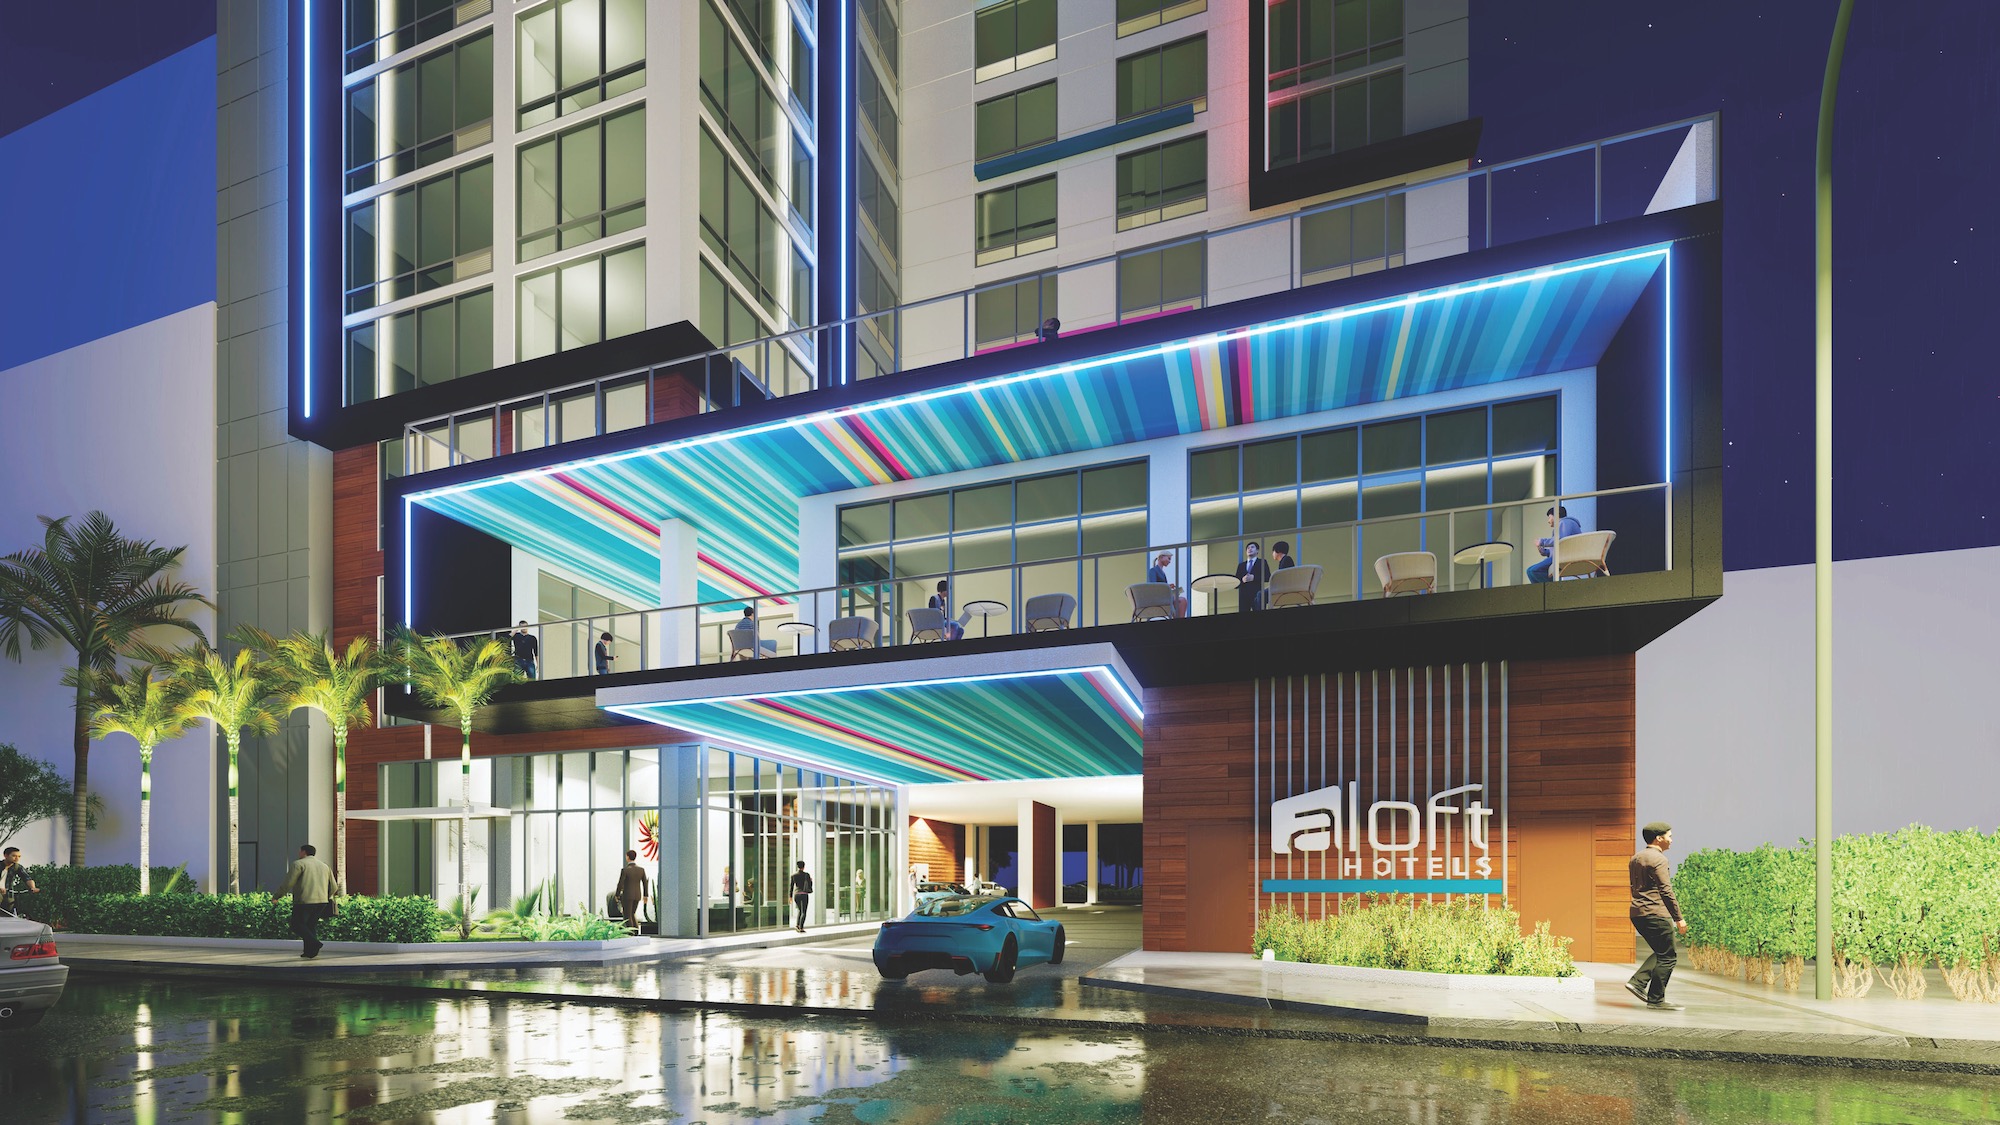 Hotel design trends for 2022 Aloft Fort Lauderdale features a second floor lobby